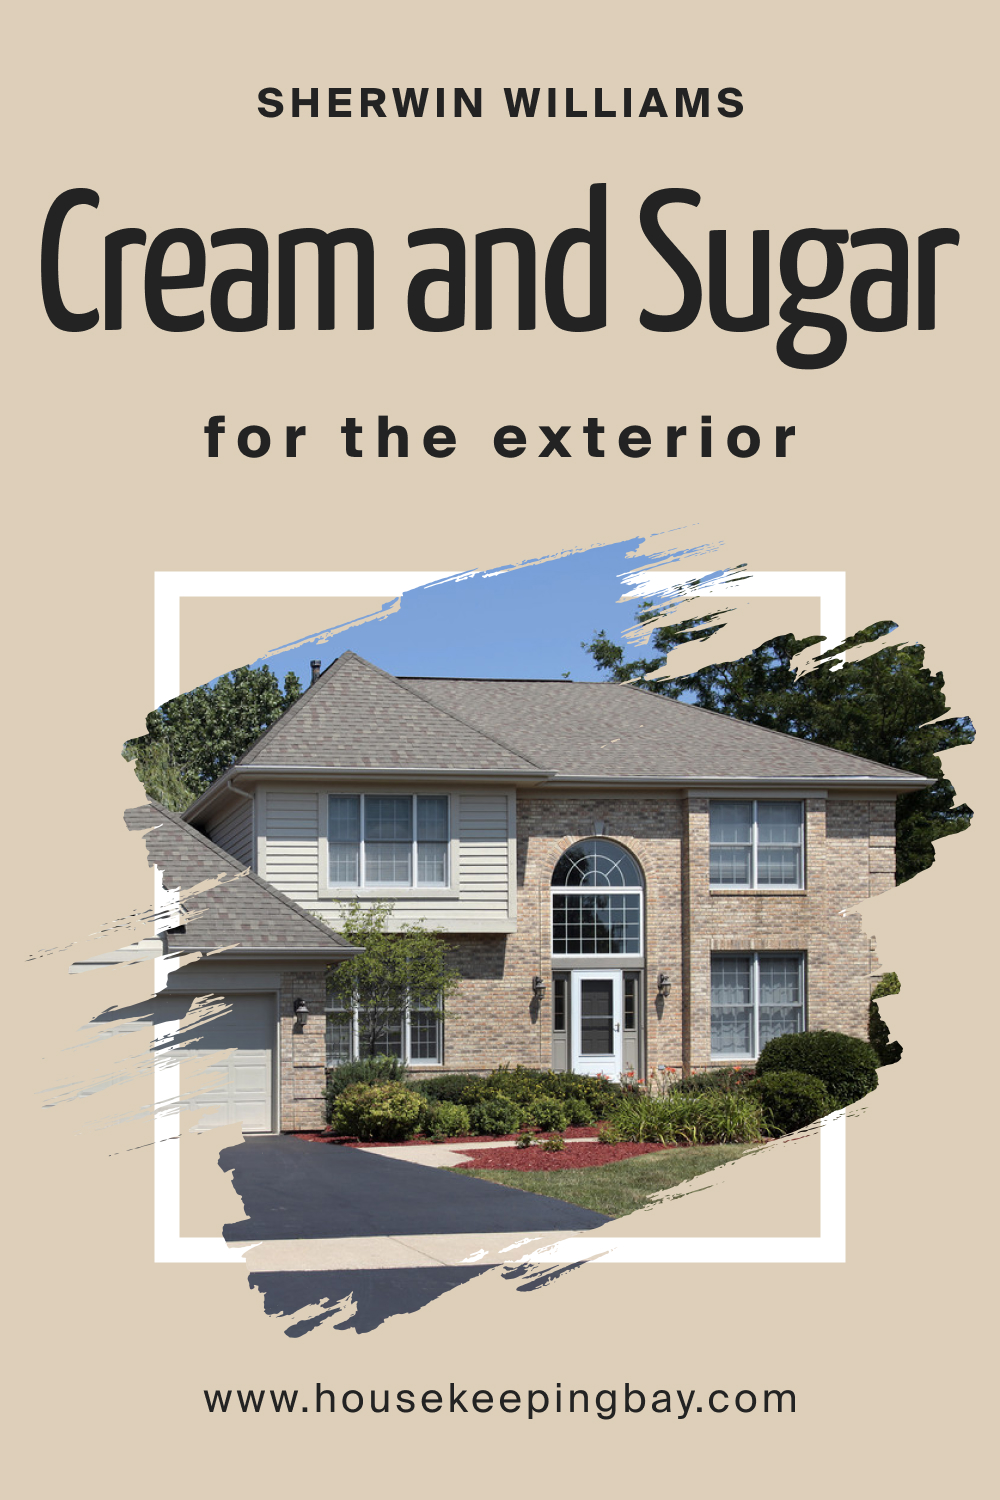 Sherwin Williams. SW 9507 Cream and Sugar For the exterior